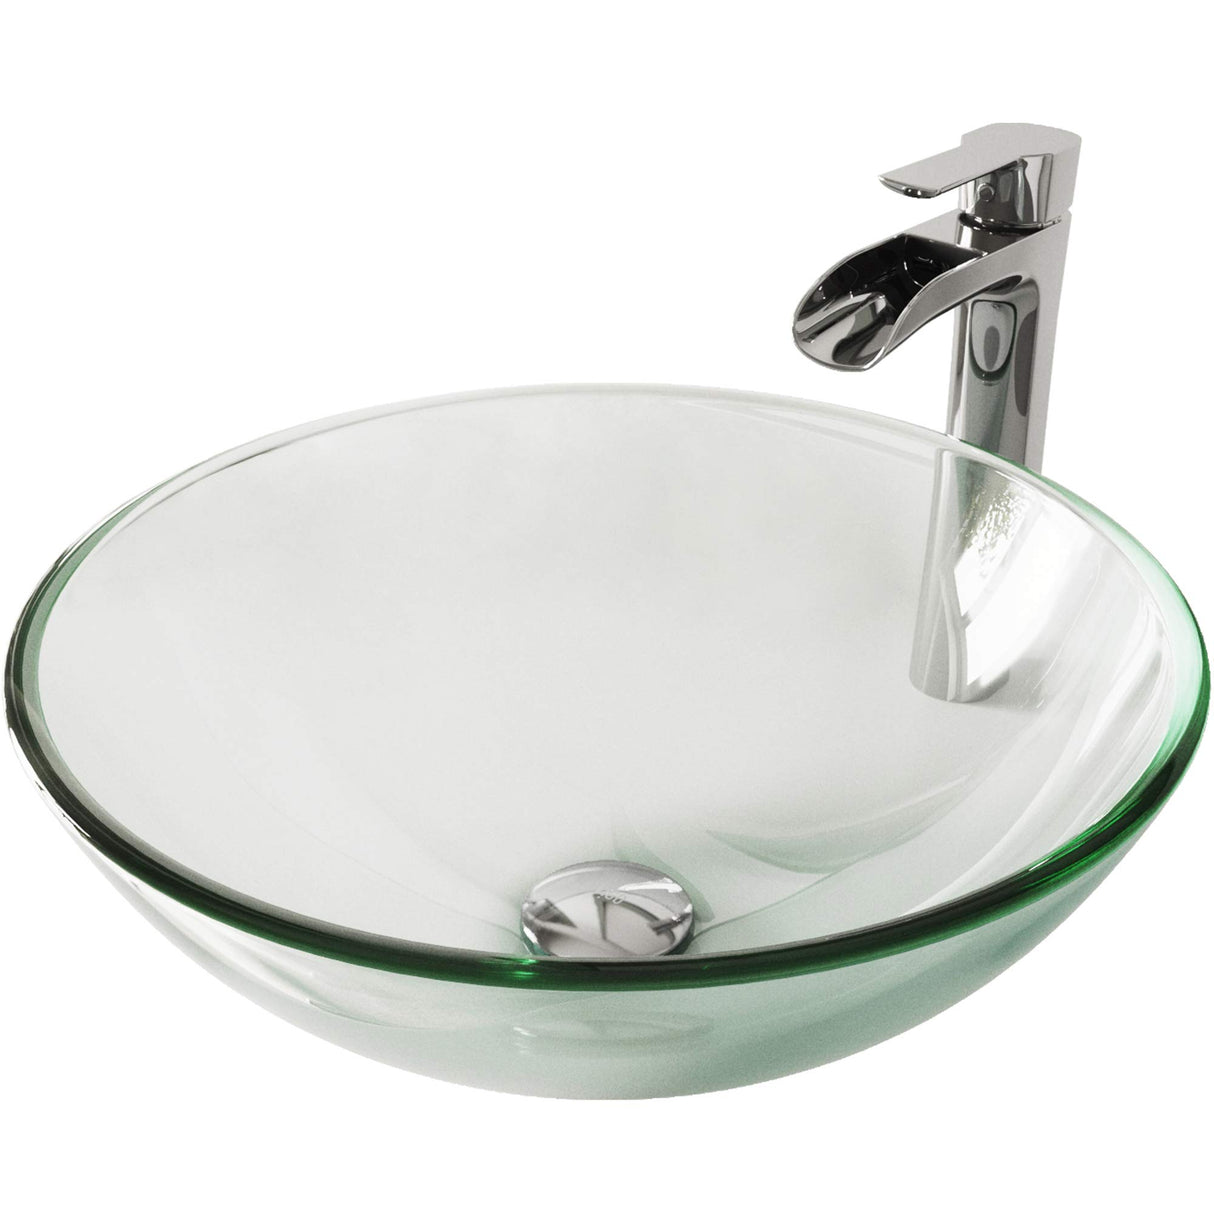 VIGO VGT1075 16.5" L -16.5" W -10.5" H Handmade Countertop Glass Round Vessel Bathroom Sink Set in Iridescent Finish with Chrome Single-Handle Single Hole Waterfall Faucet and Pop Up Drain